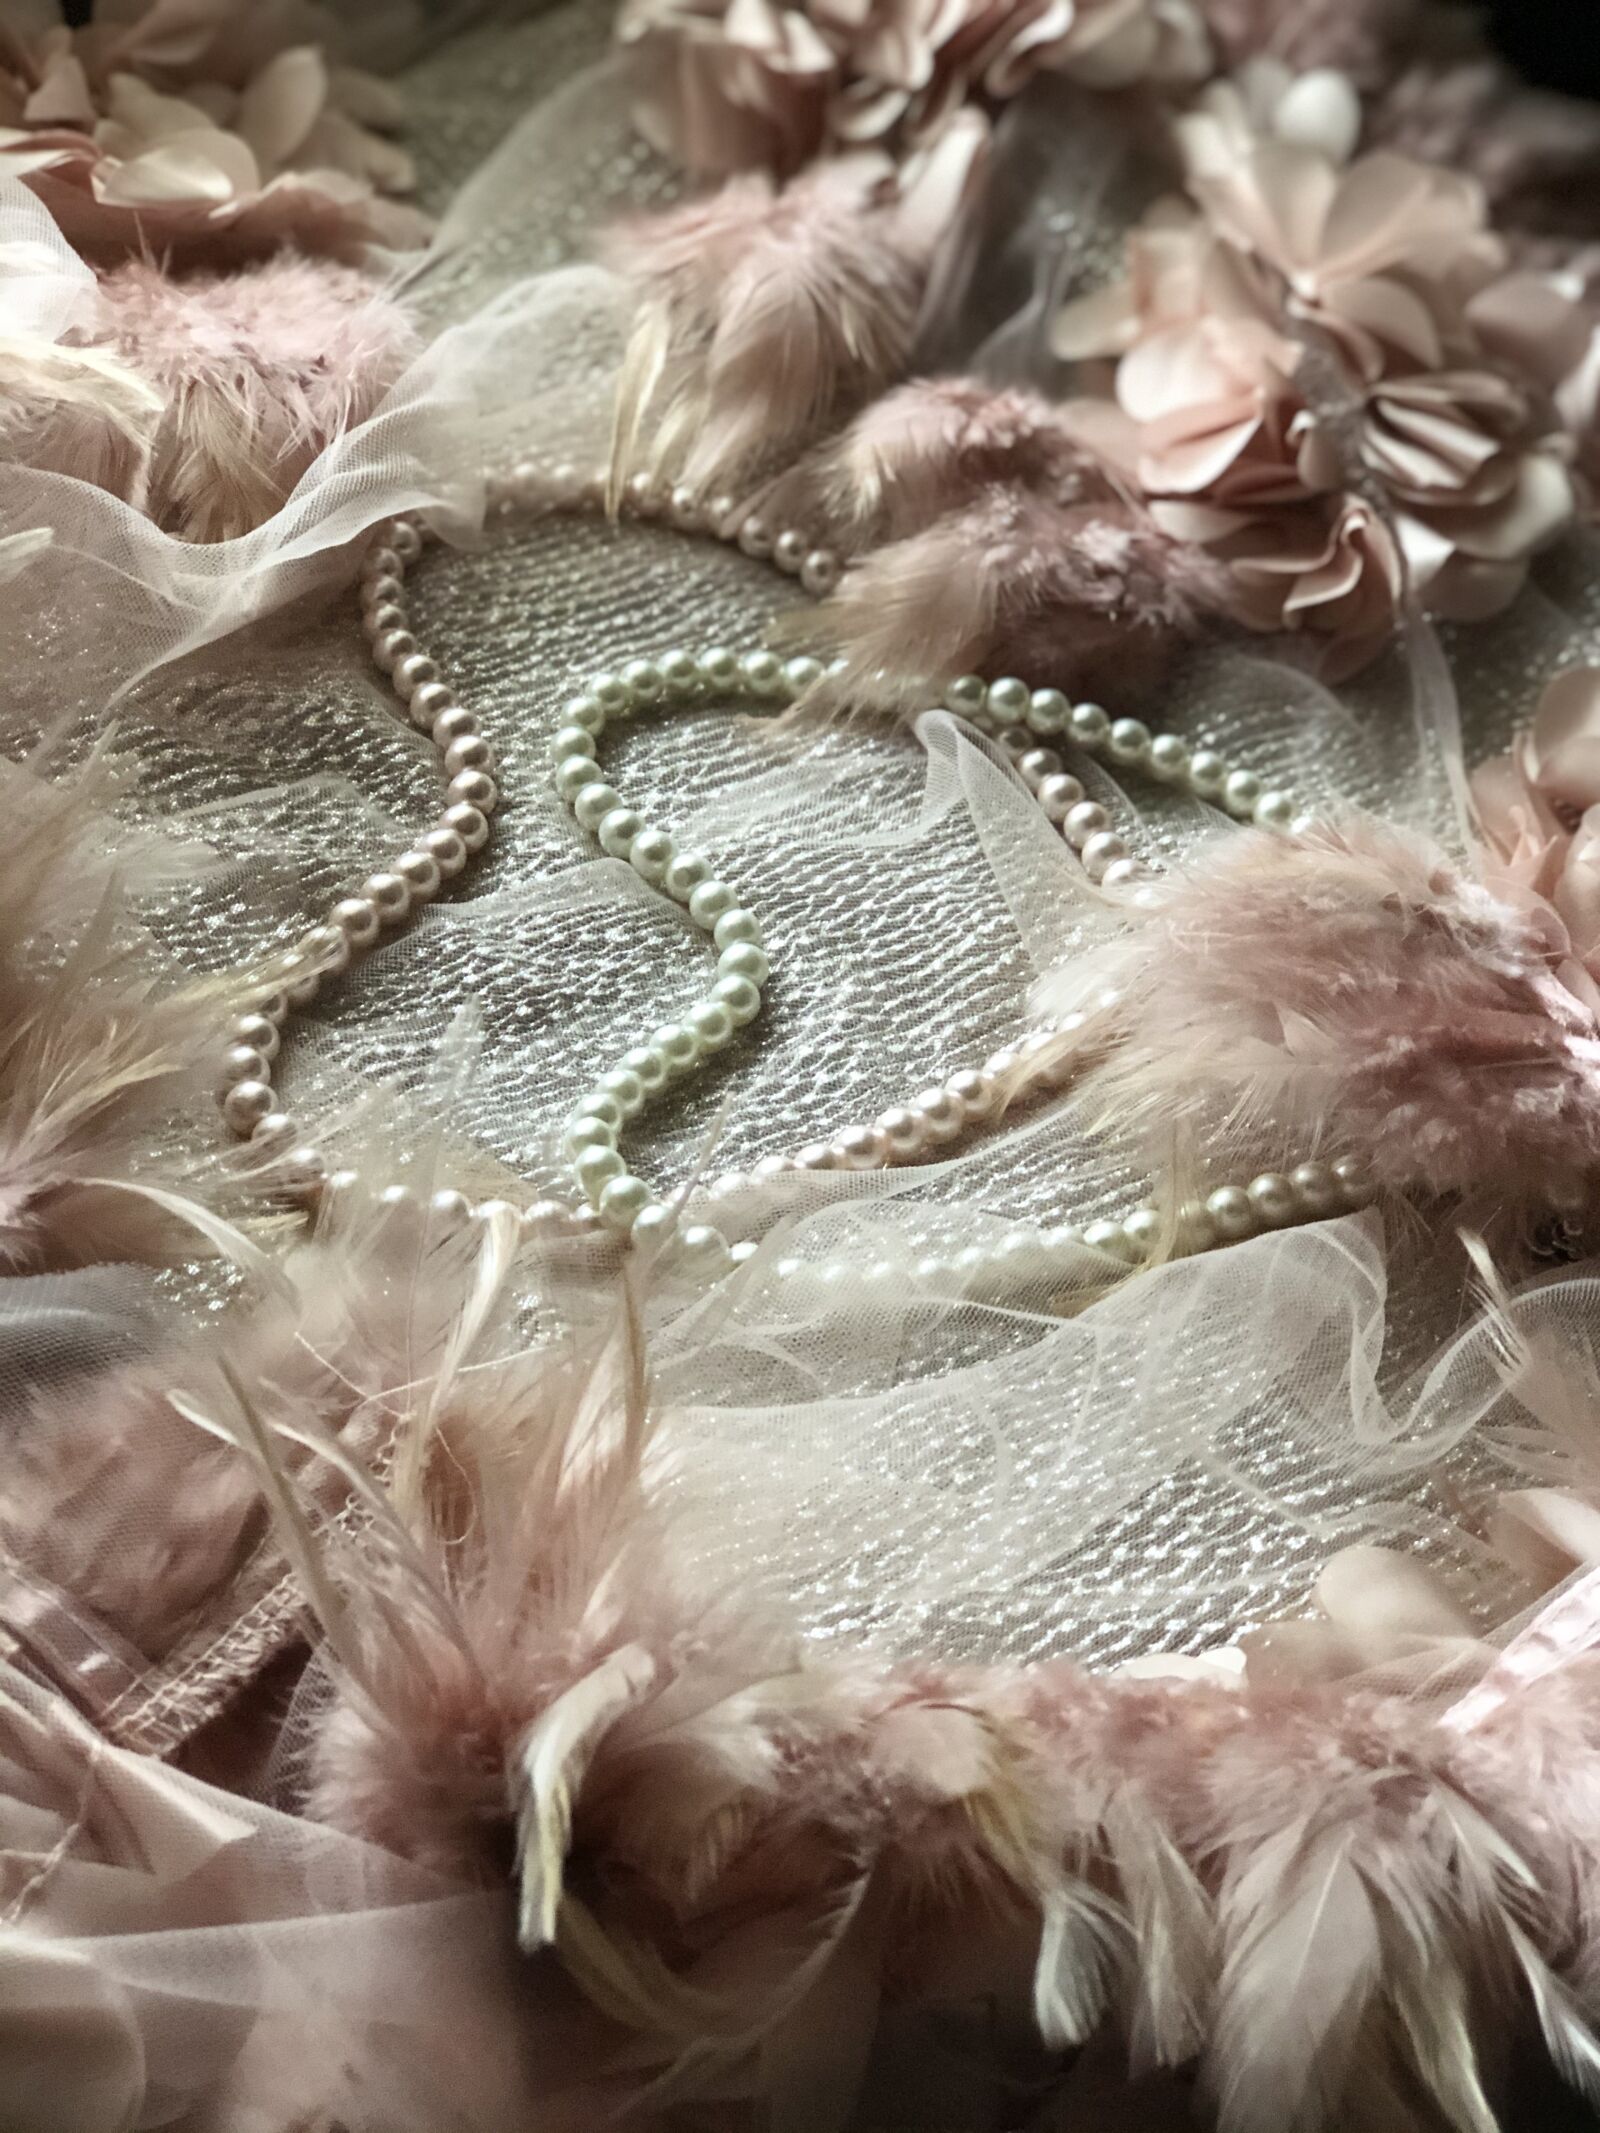 Apple iPhone 8 Plus + iPhone 8 Plus back dual camera 6.6mm f/2.8 sample photo. Feathers, pearls, antique photography